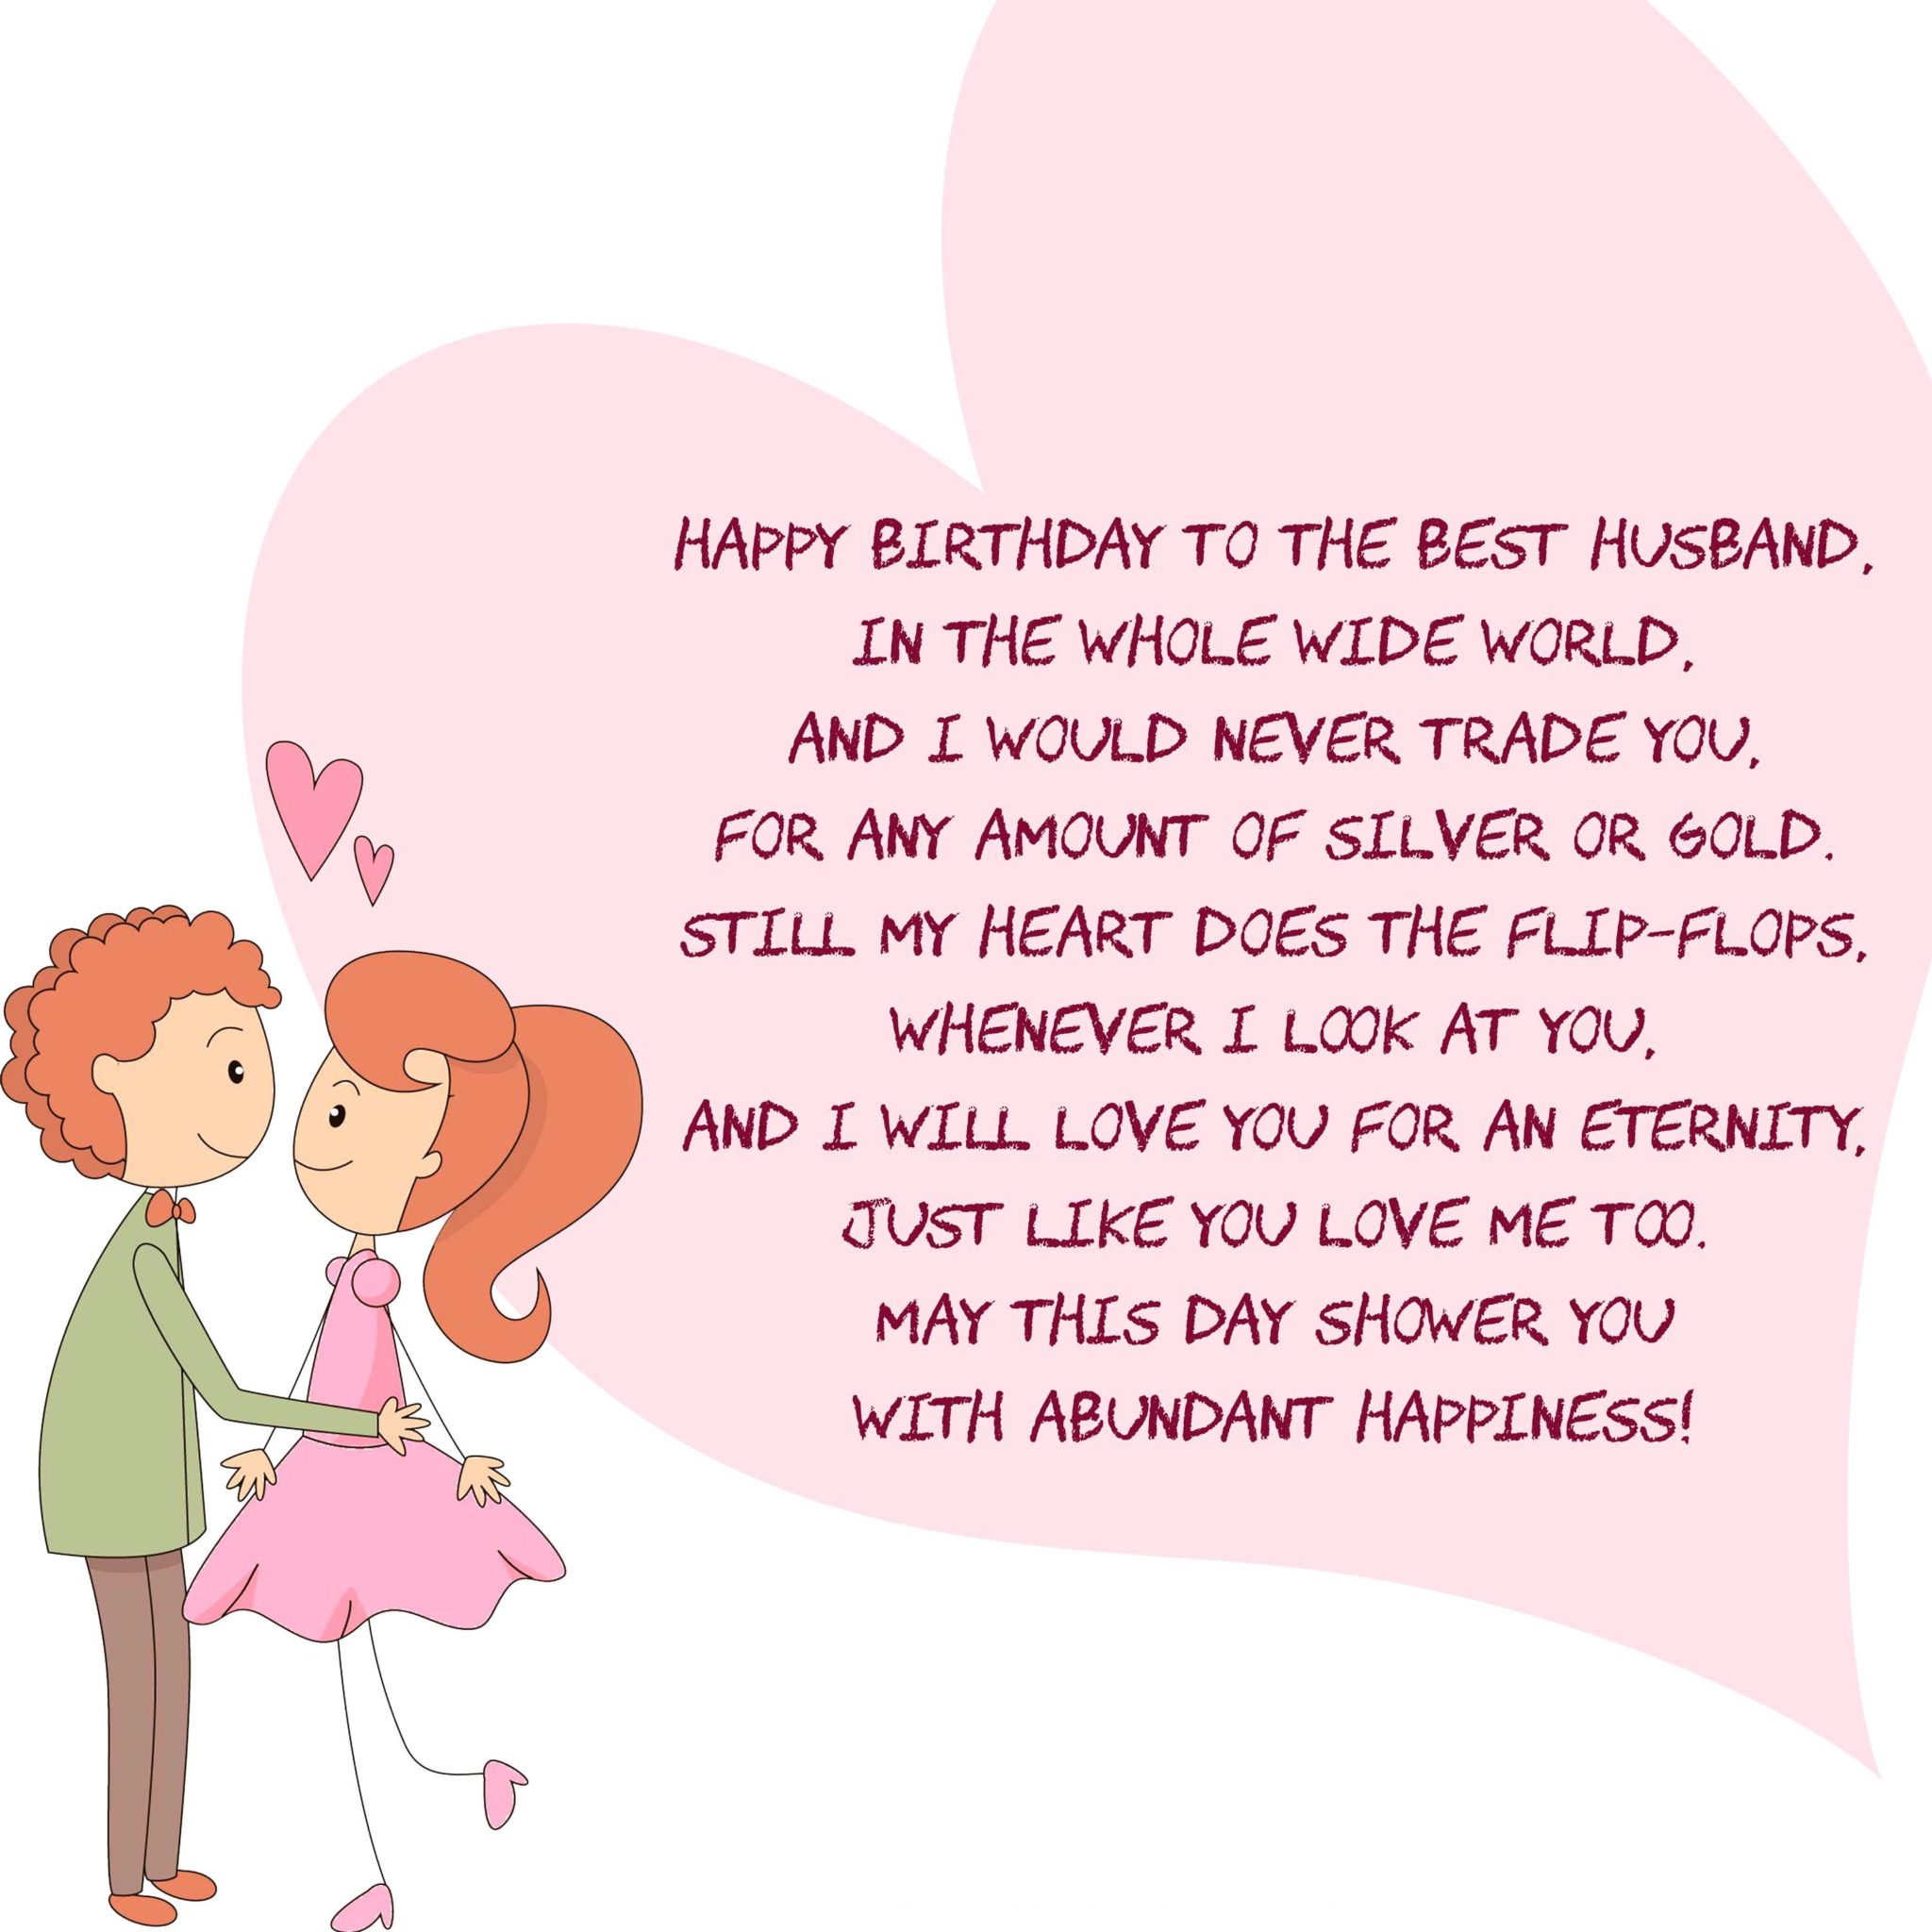 Happy birthday poems for Him or Her